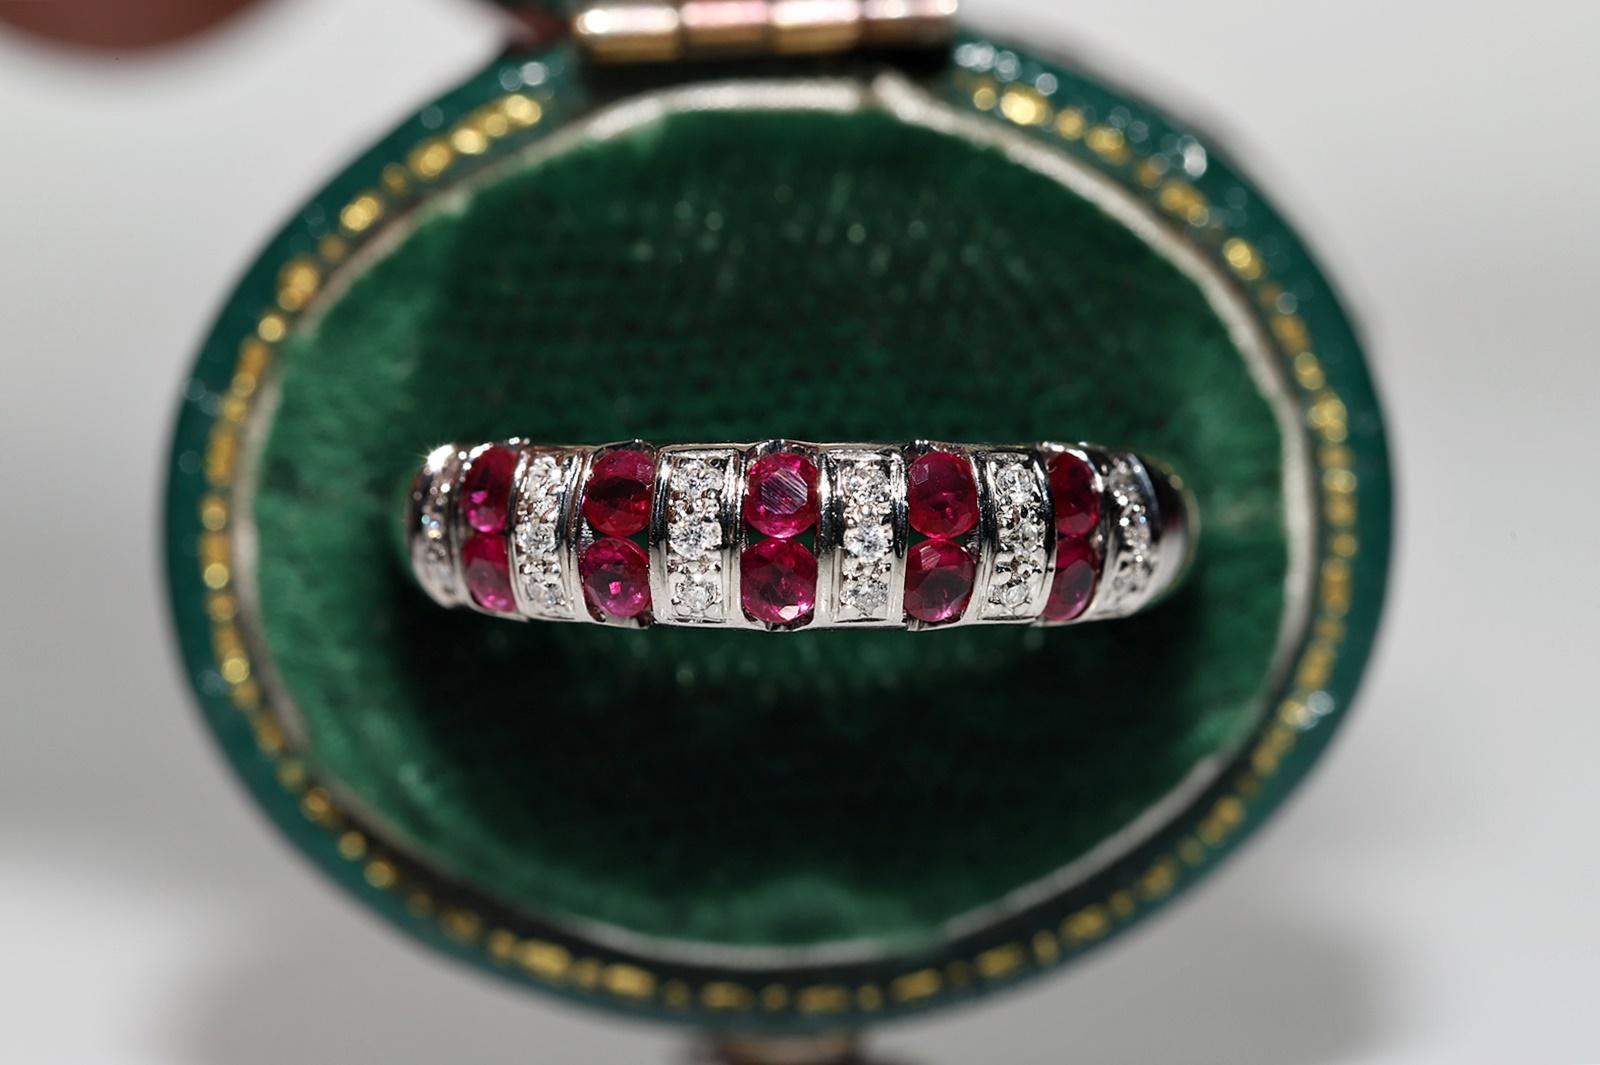 In very good condition.
Total weight is 3.5 grams.
Totally is diamond 0.25 ct.
The diamond is has G-H color and vs-s1 clarity.
Totally is ruby 0.50 ct.
Ring size is US 7 (We offer free resizing)
We can make any size.
Box is not included.
Please